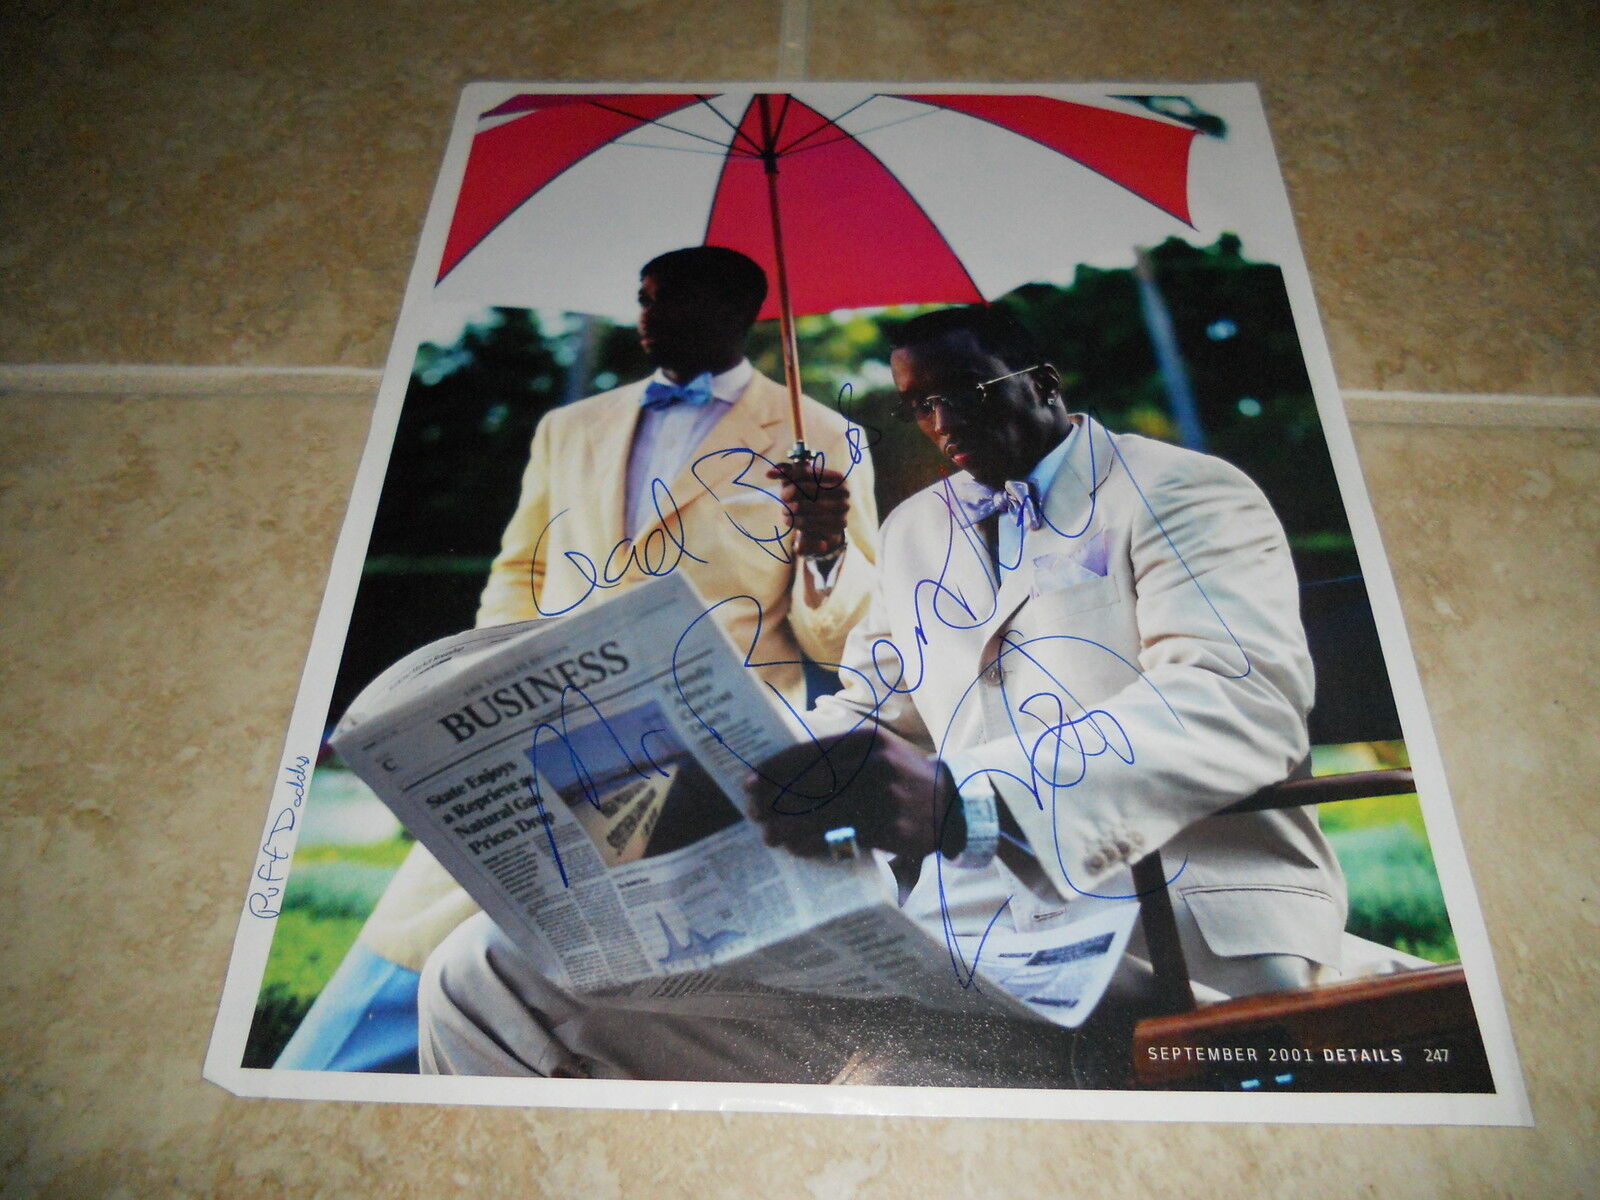 Puff Daddy P Diddy Signed Autographed 9X11 Magazine Photo Poster painting #2 PSA Guaranteed F4